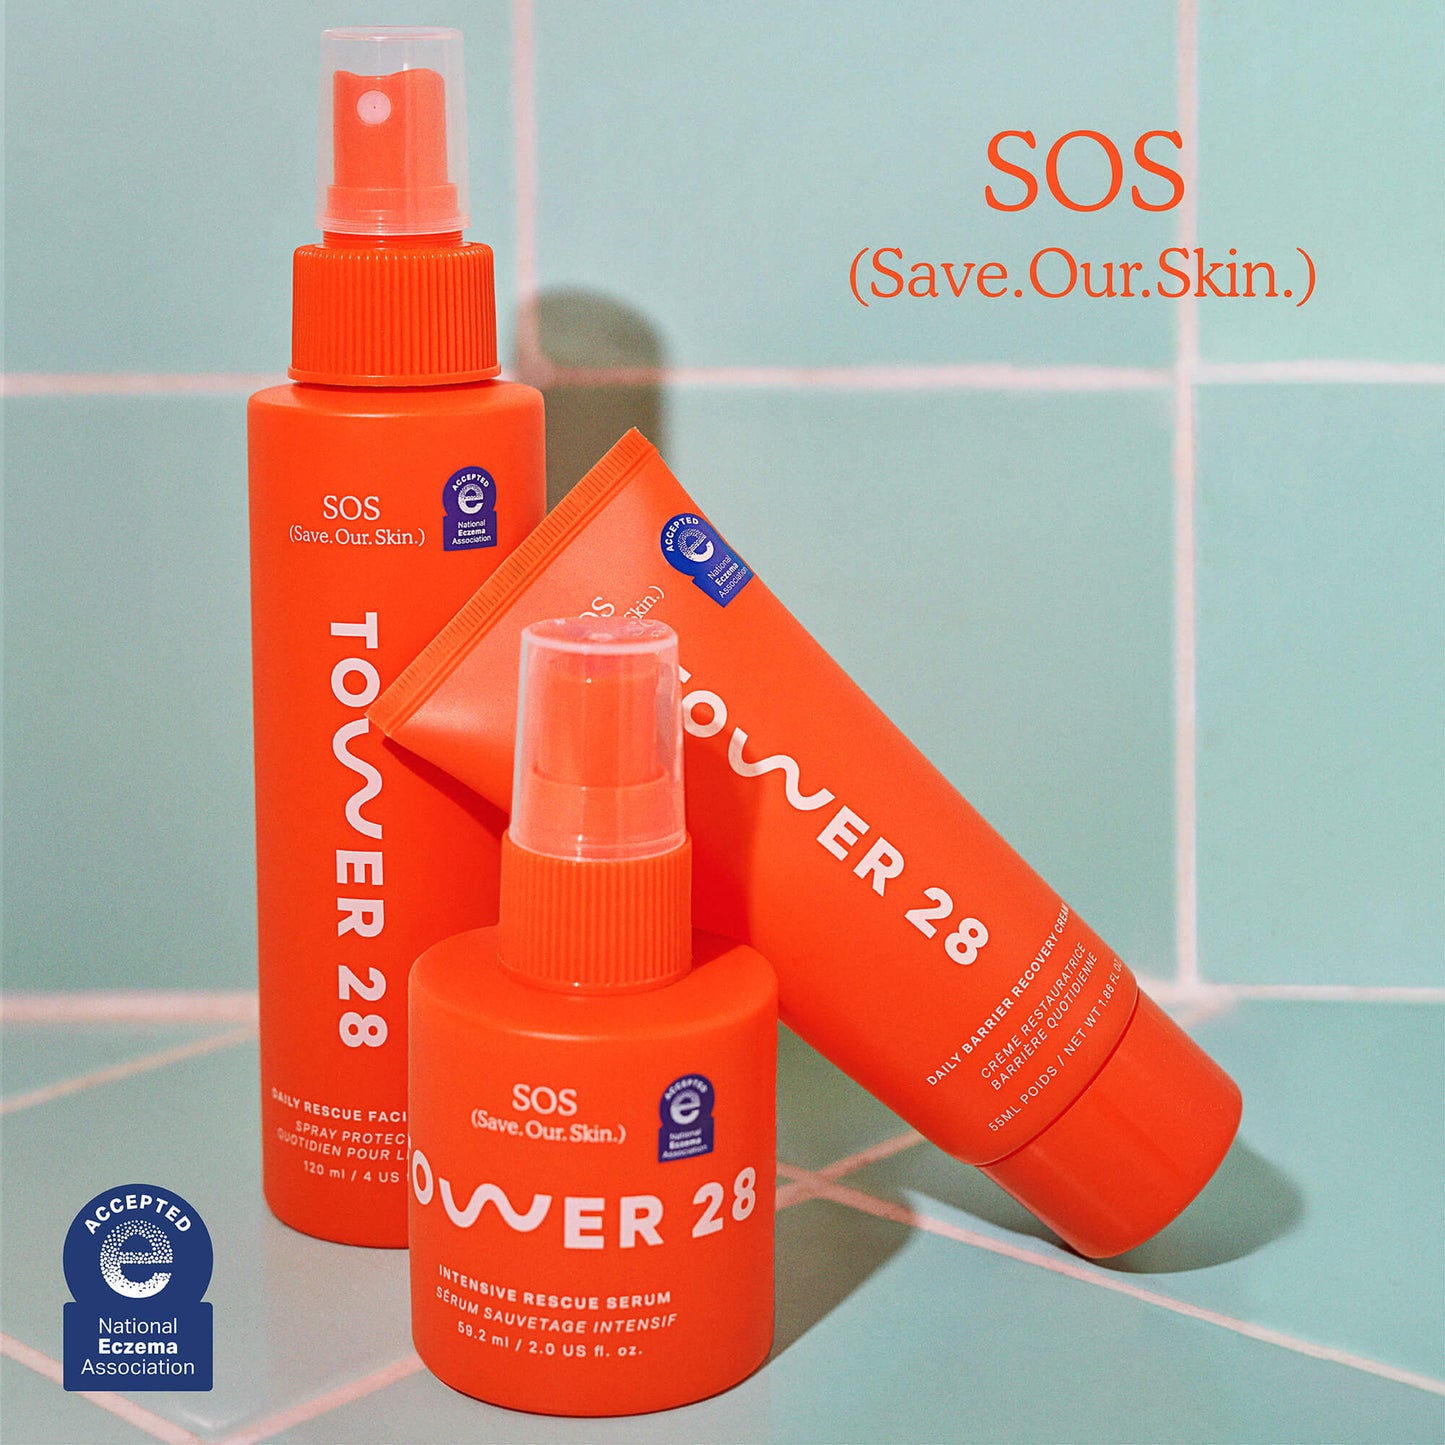 [Shared: Tower 28 Beauty Complete Skincare Routine. SOS Daily Rescue Facial Spray Full-Size. SOS Intensive Rescue Serum. SOS Daily Barrier Recovery Cream. Shown in bathroom over blue tile. Overlayed with National Eczema Association Seal of Acceptance.]